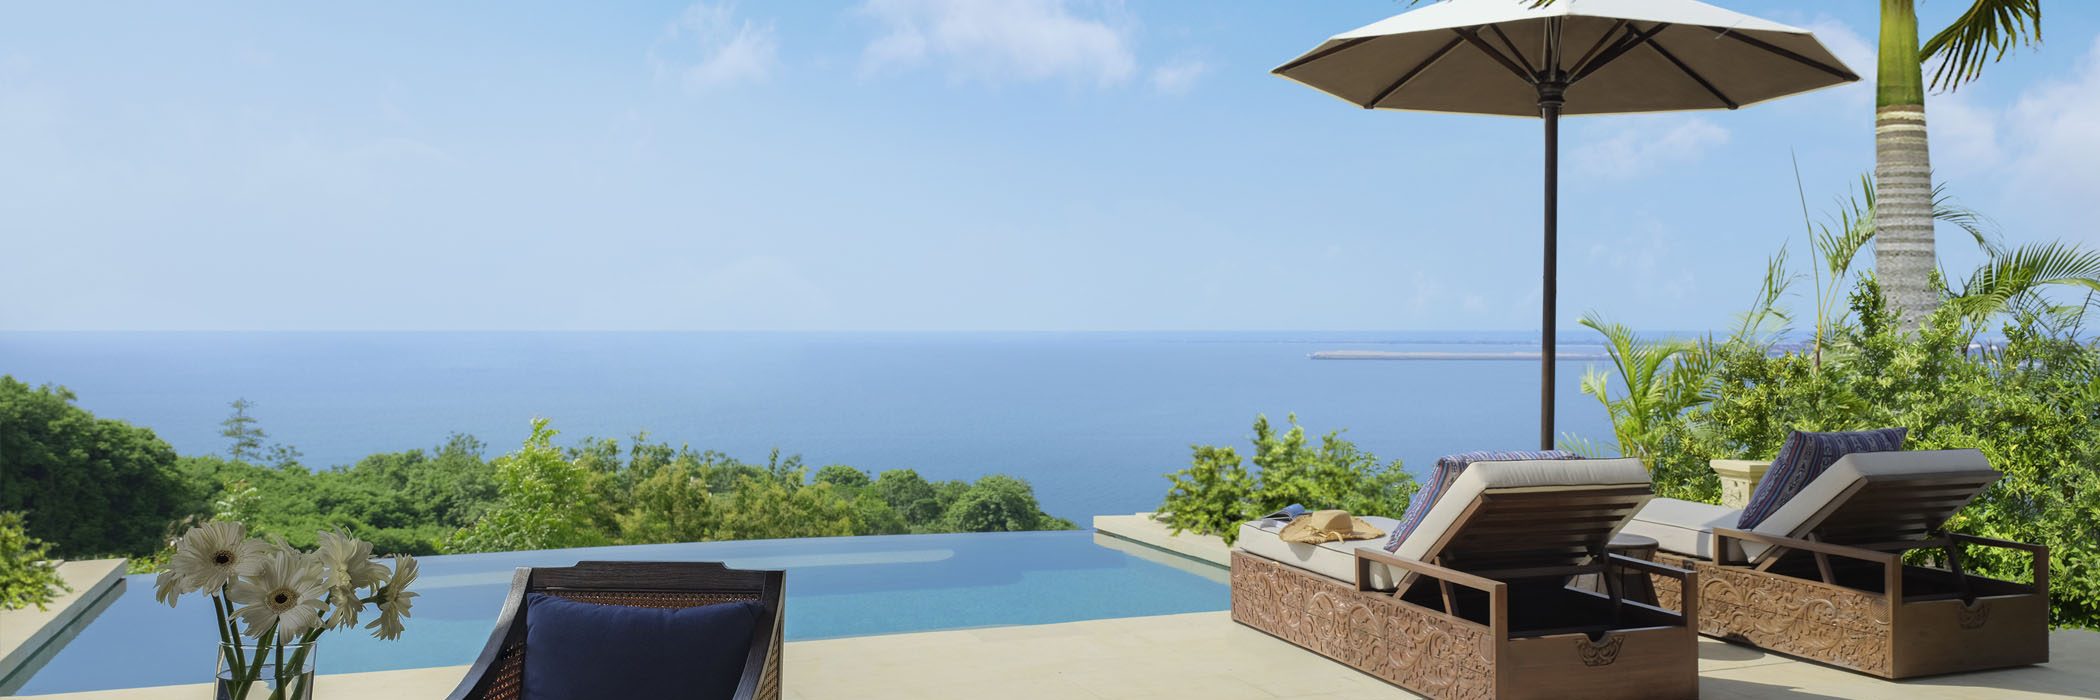 Raffles Bali - Raffles Bali is a clifftop sanctuary that presents the very best of luxury and exclusivity